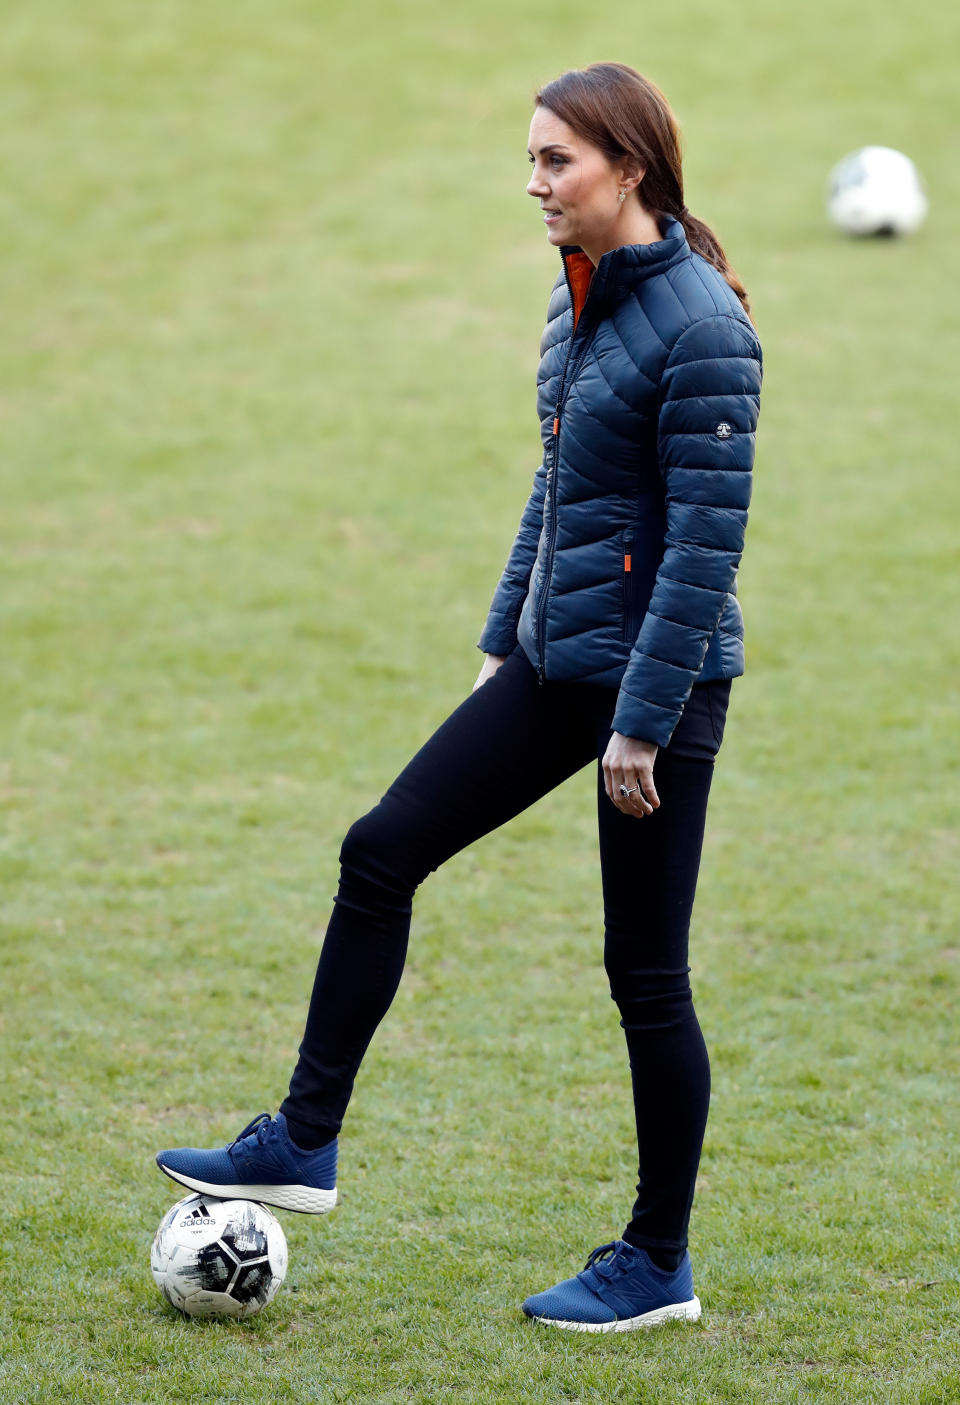 The Duchess of Cambridge plays football during a visit to Windsor Park Stadium in February 2019 in Belfast, Northern Ireland.  (Getty Images)